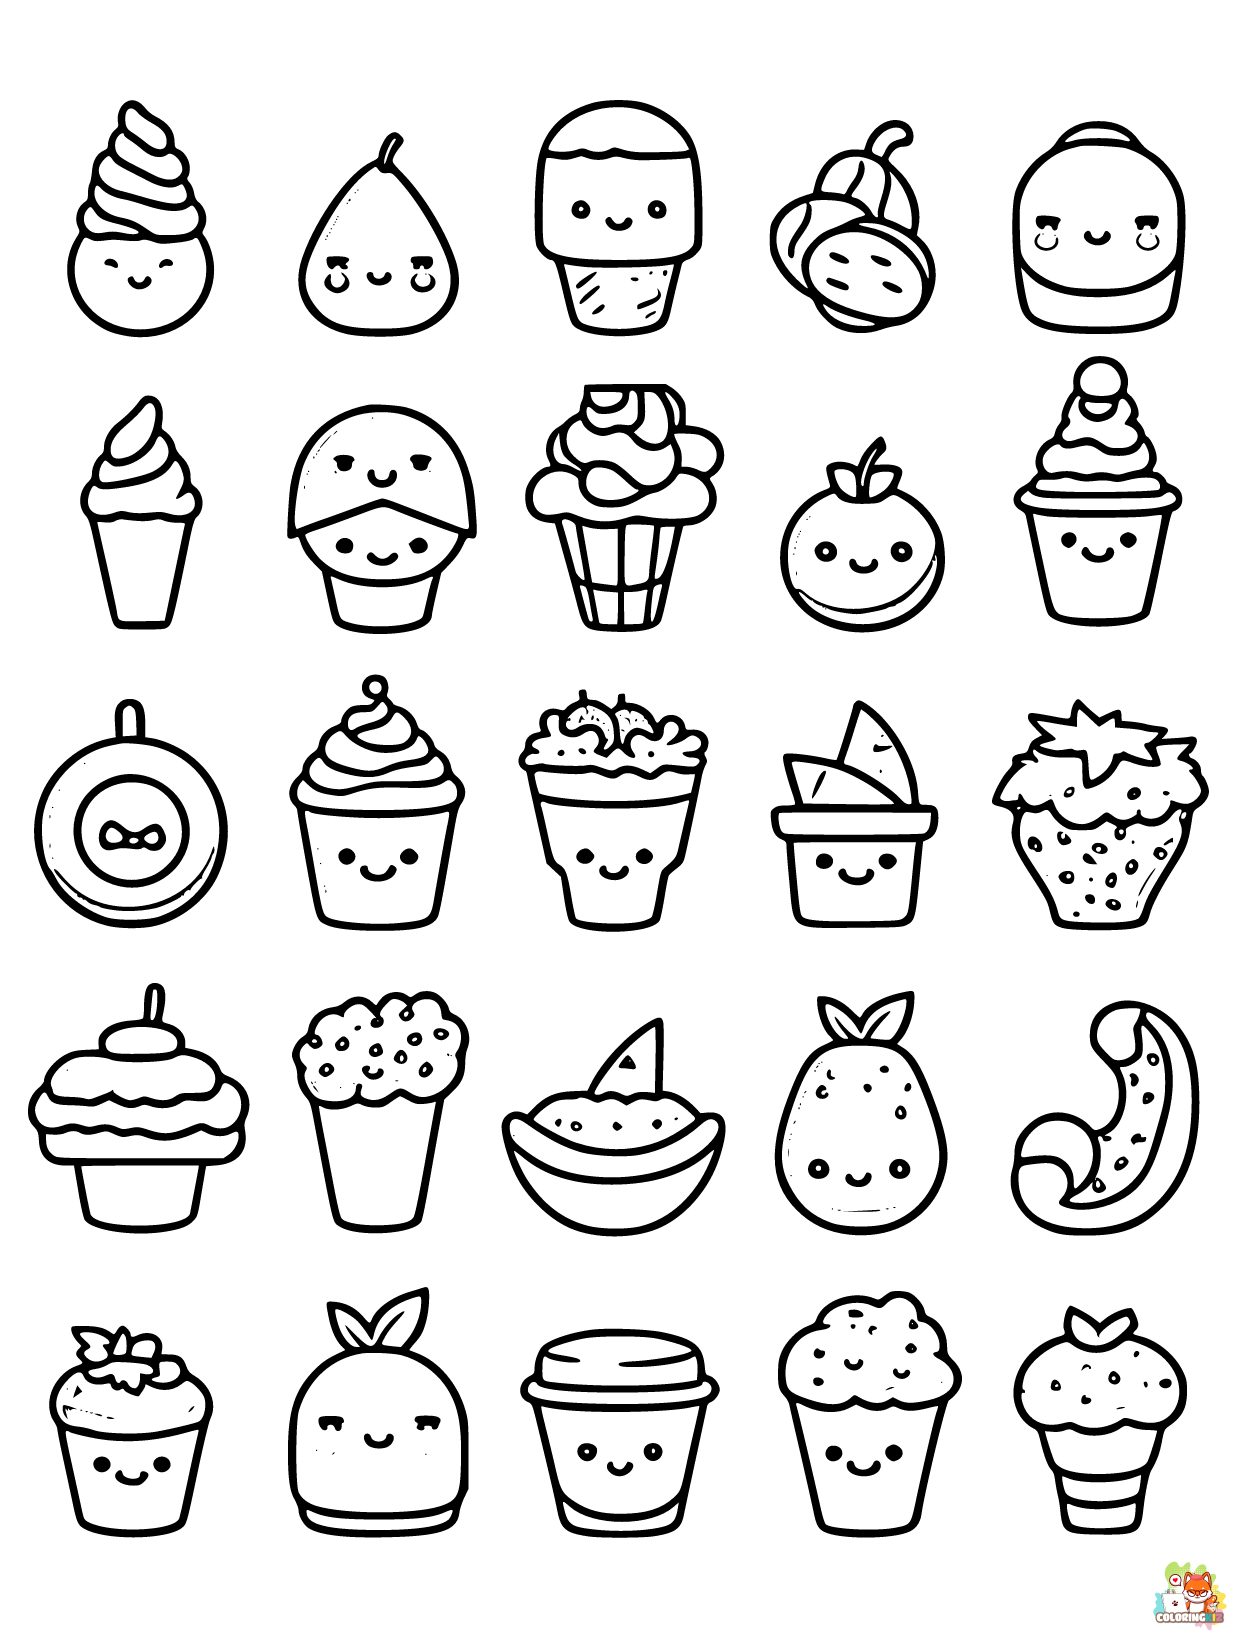 Ice Cream Coloring Pages to print